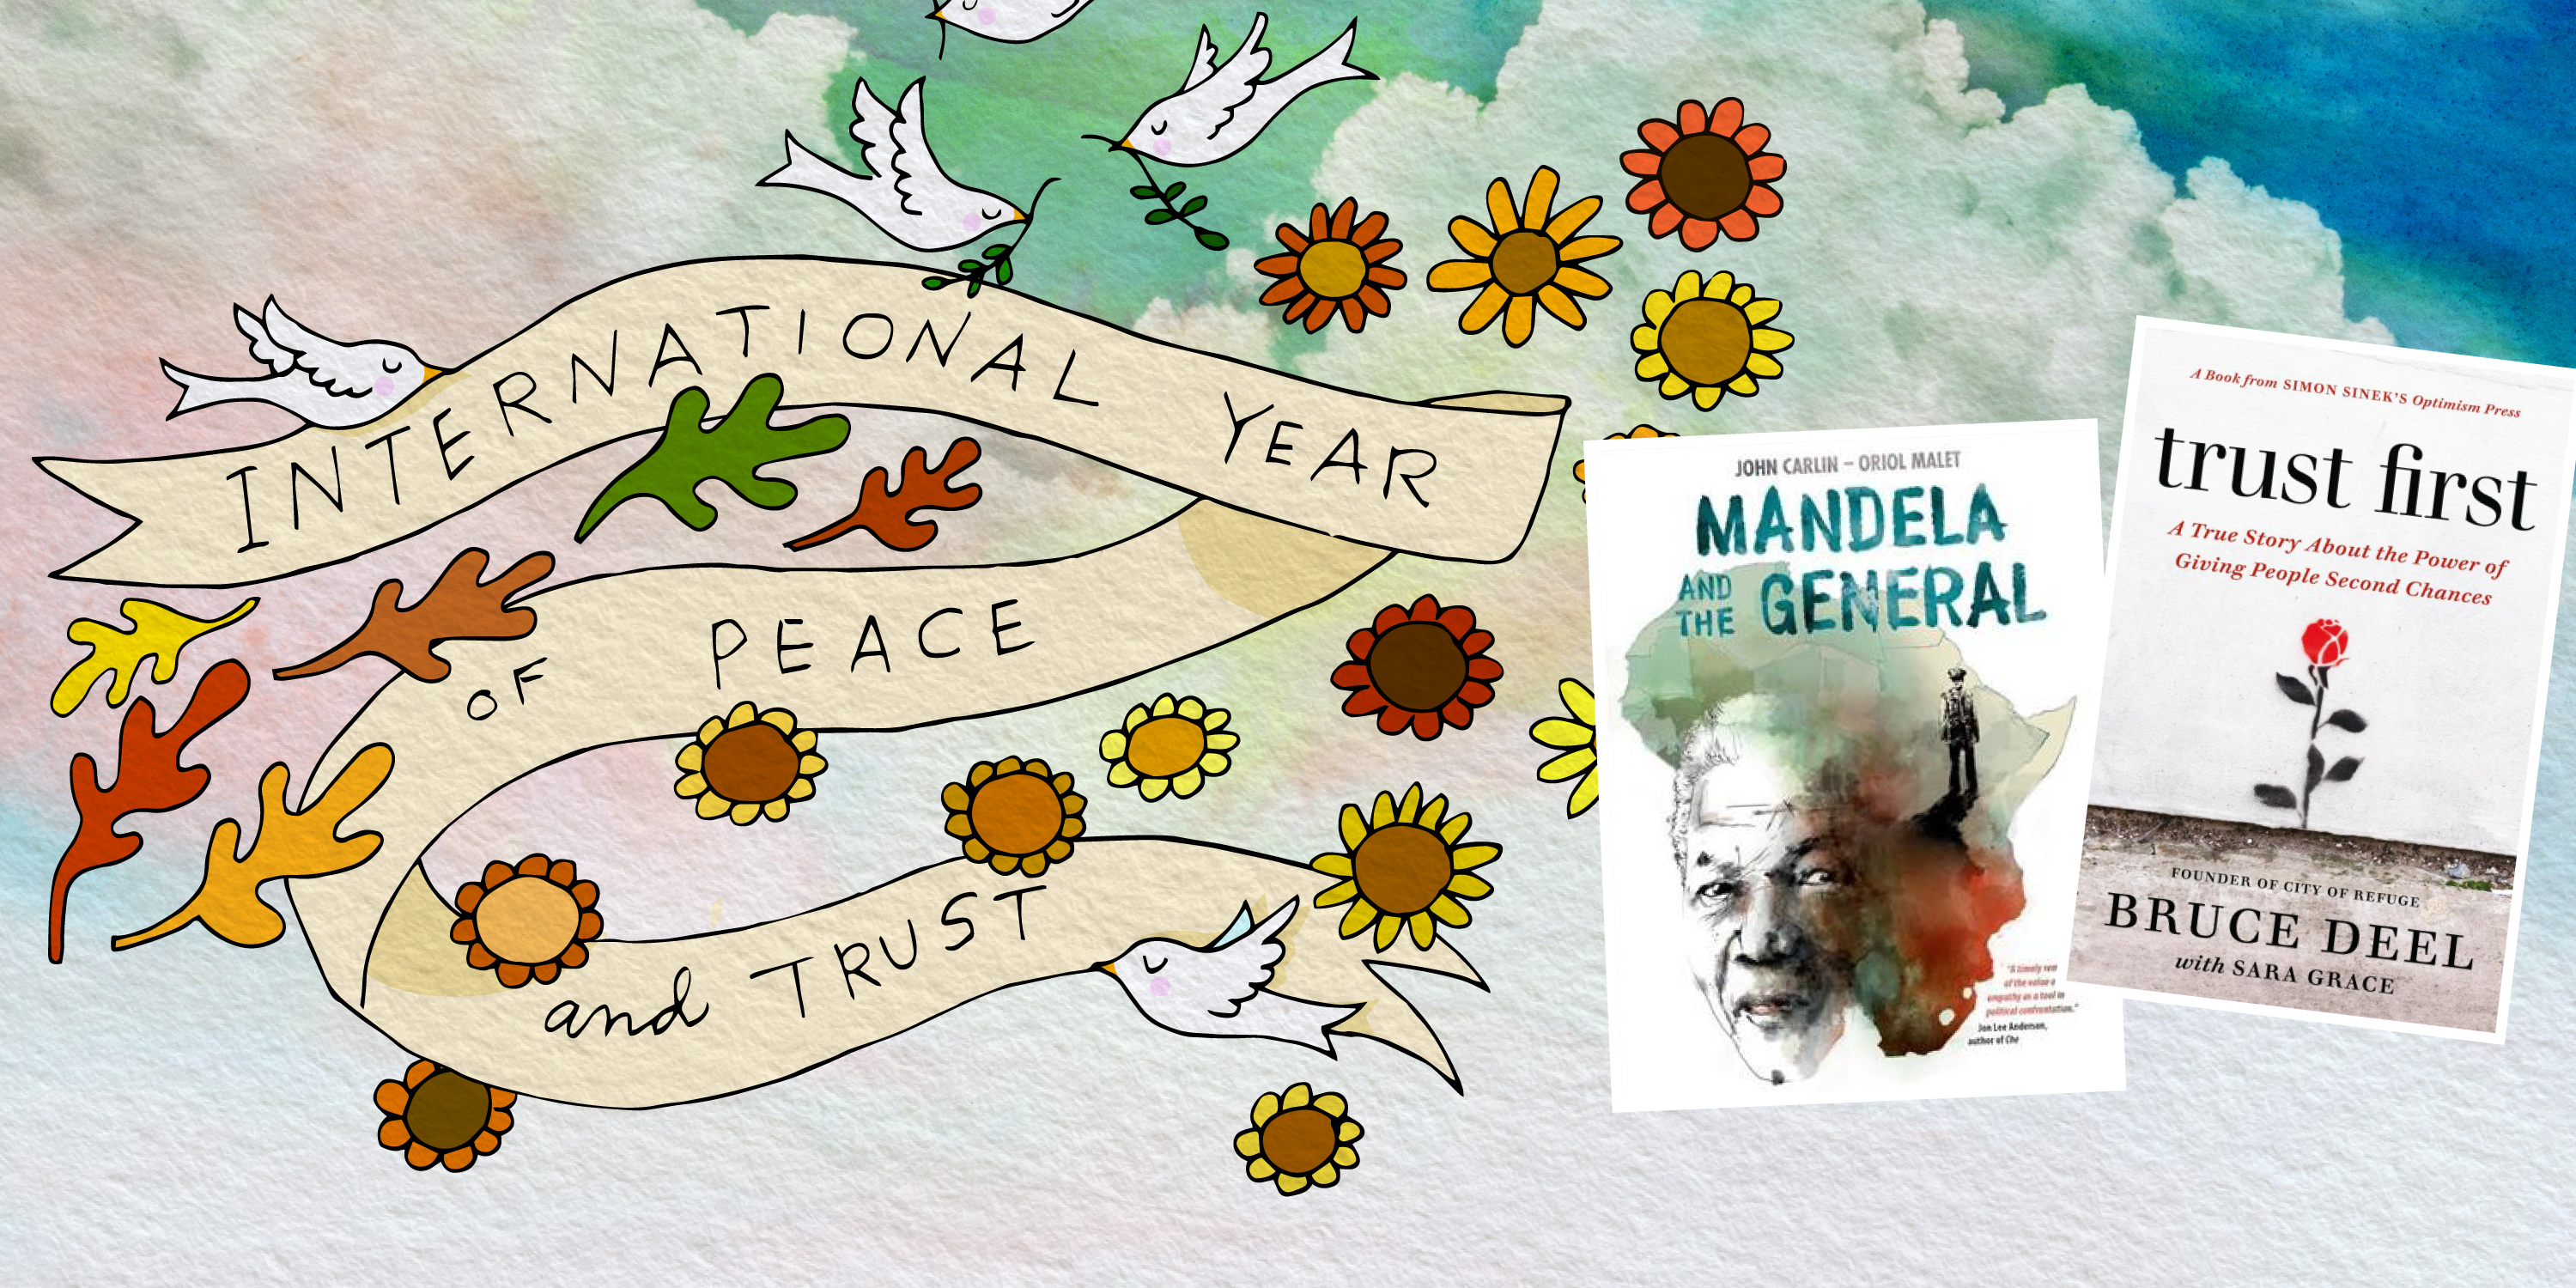 International Year of Peace and Trust: Mandela and the General & Trust First